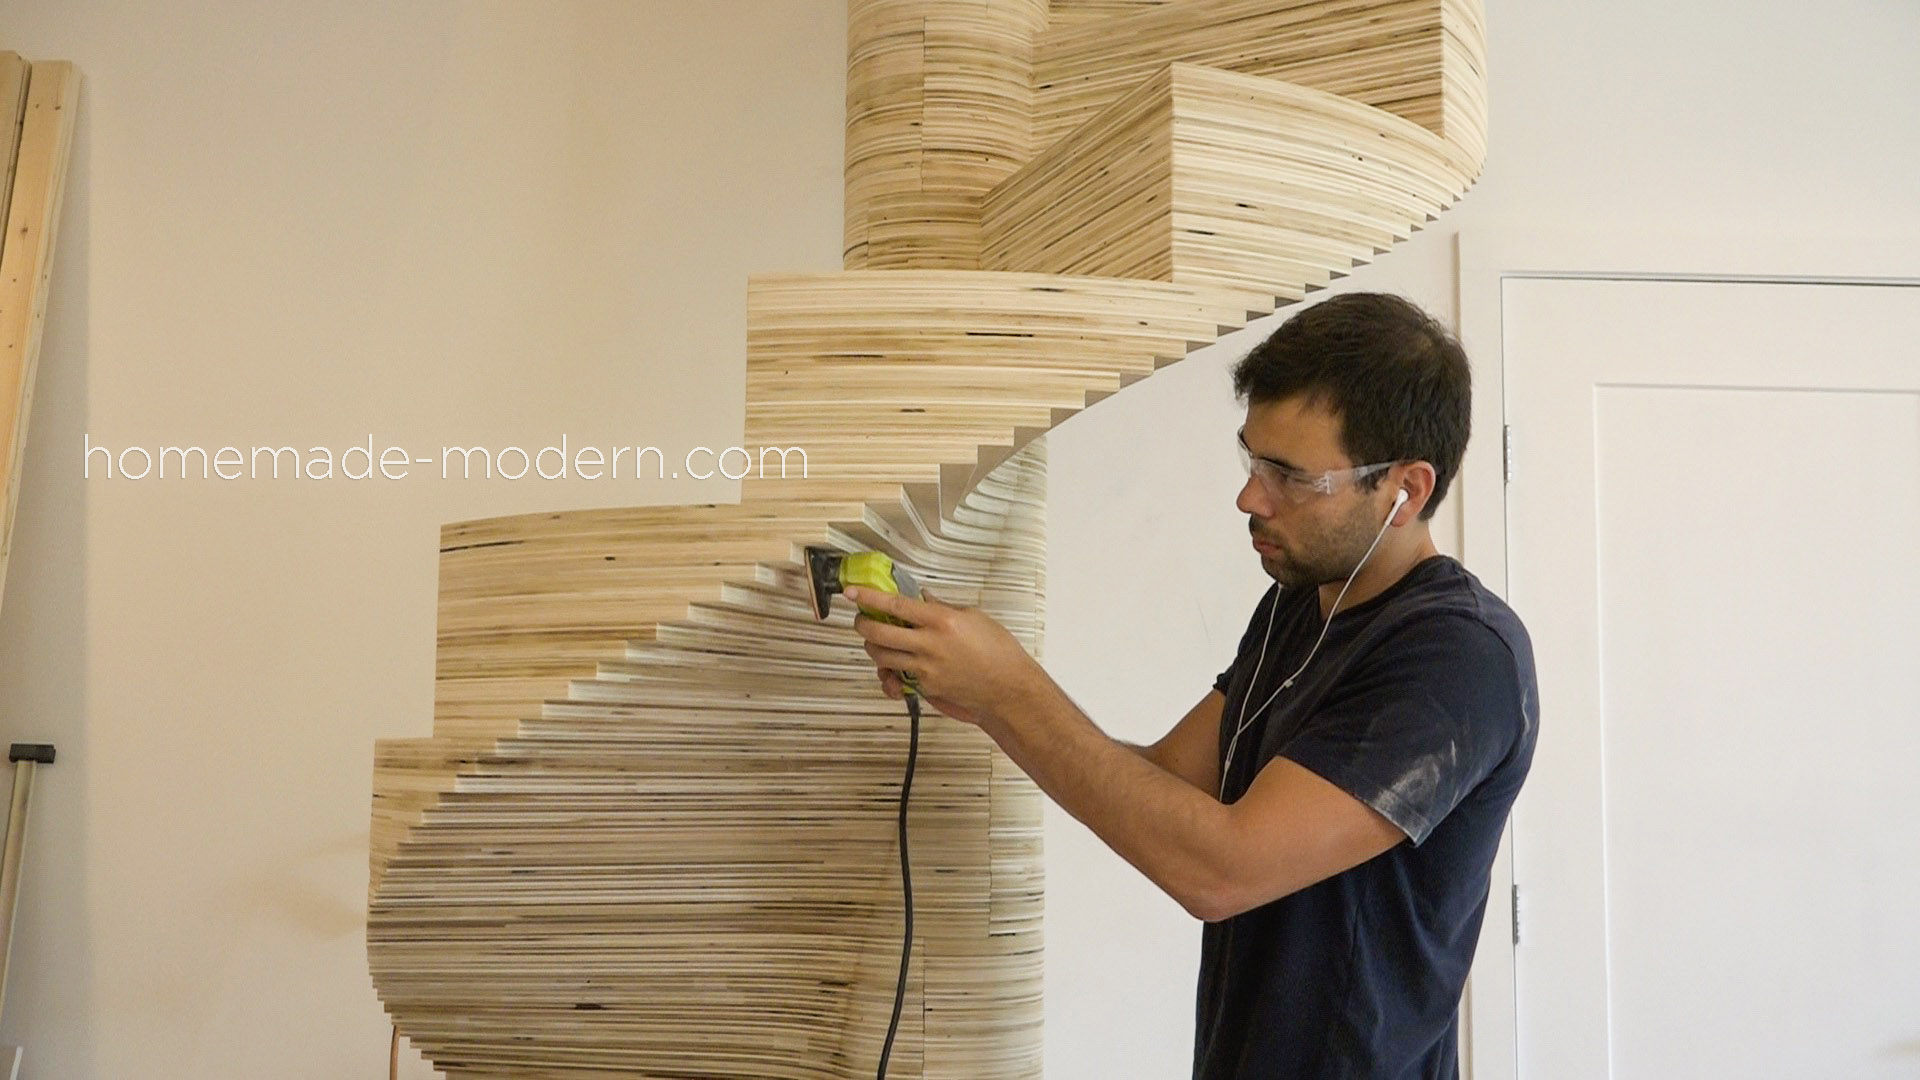 This CNCed Spiral staircase was made using the X-Carve by Inventables.com and is made from Â¾â thick furniture grade plywood. For more information go to HomeMade-Modern.com